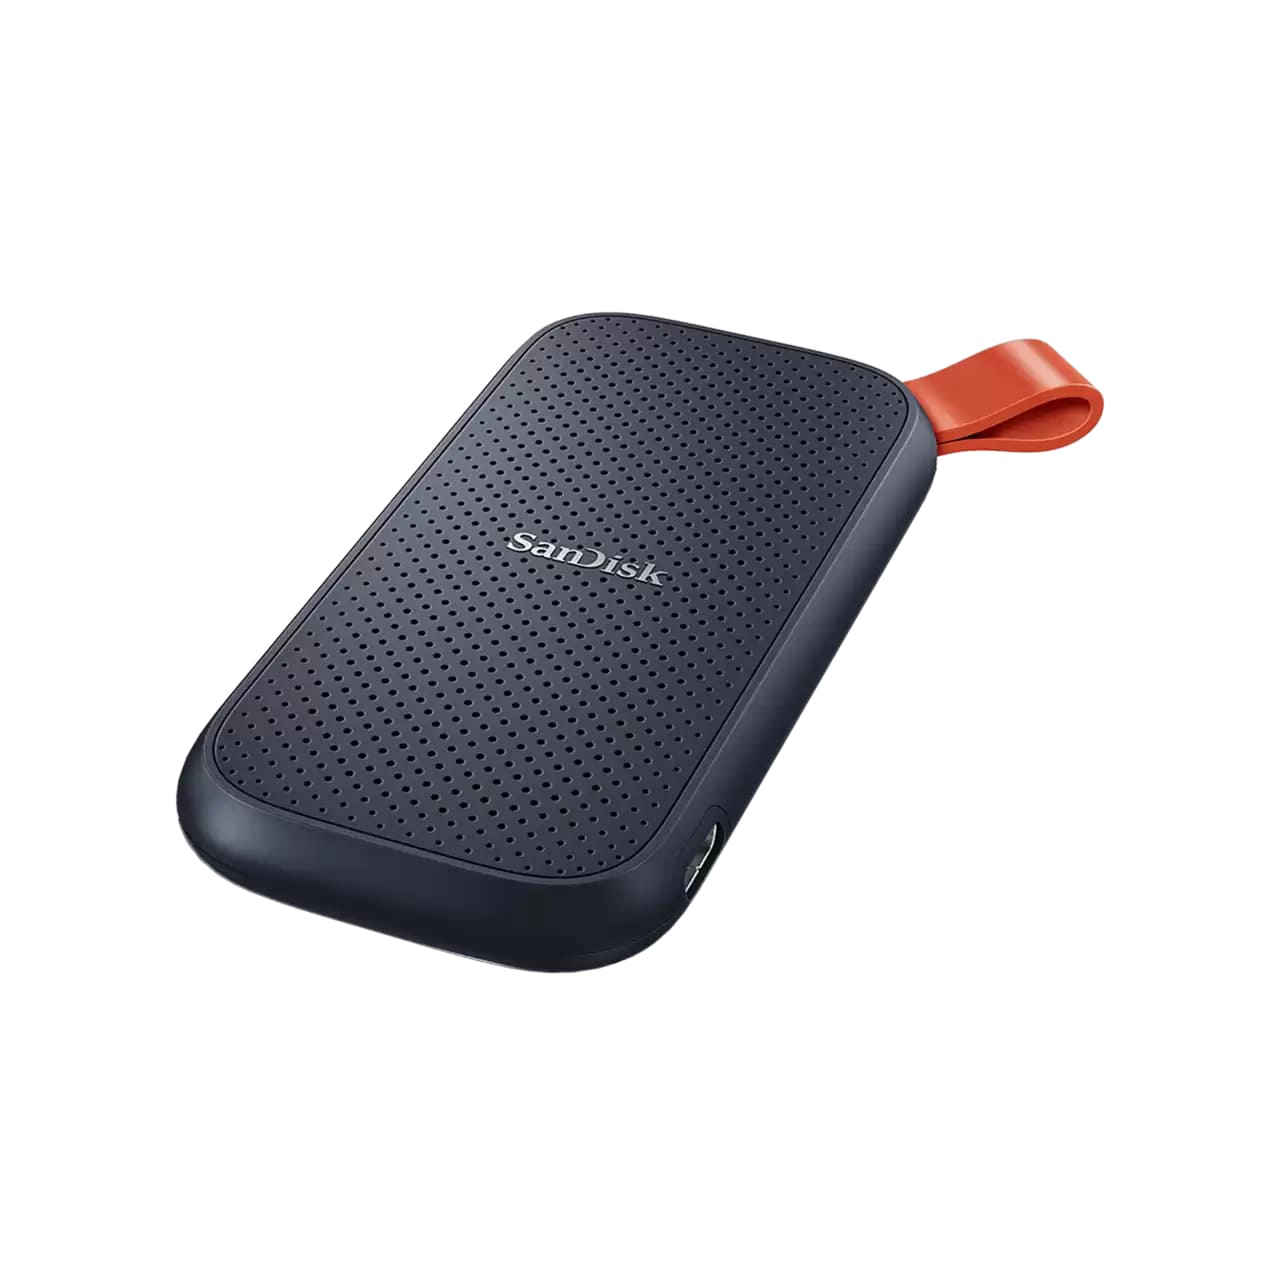 SanDisk Portable SSD 1TB USB 3.2 Gen2 External Solid State Drive with 800mb/s Read Speed | SDSSDE30-1T00-G26